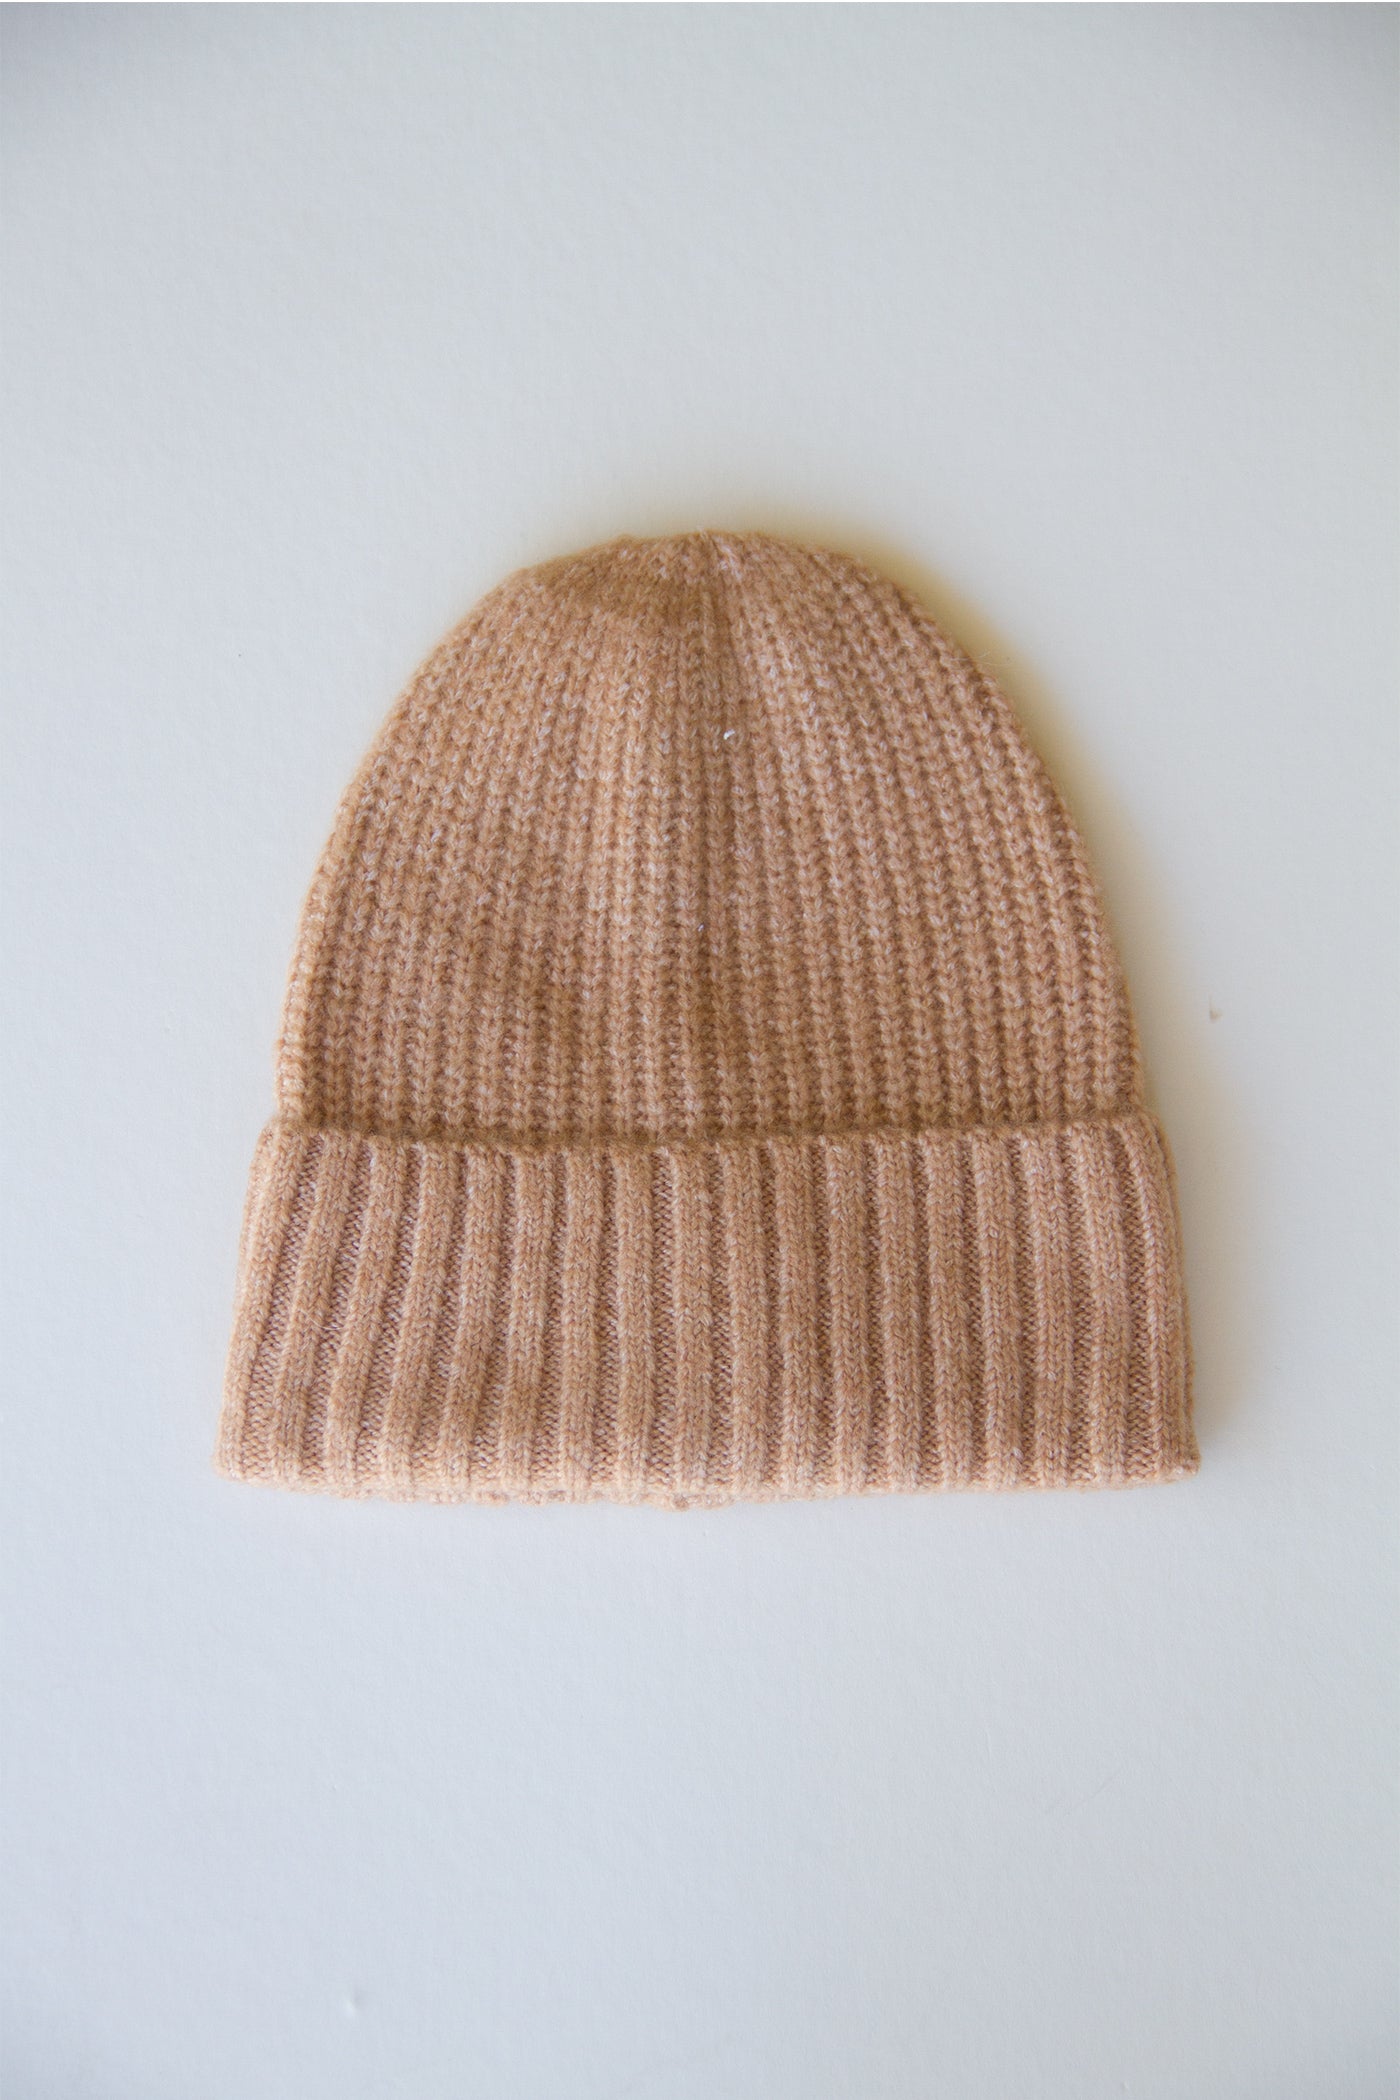 Ribbed Knit Beanie by Free People